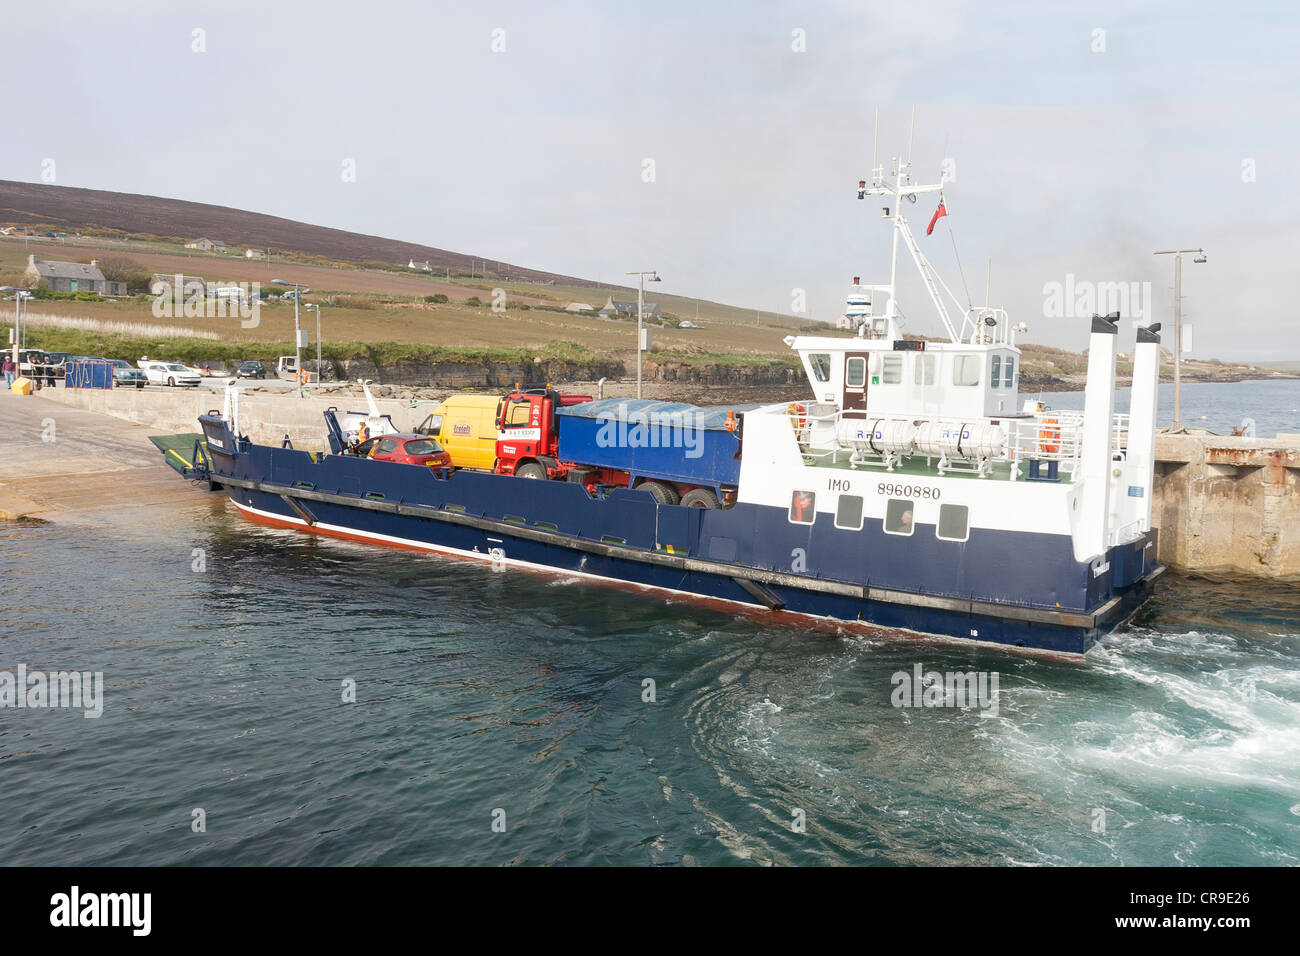 The Island of Rousay - Orkney Islands, Scotland.  The ferry arriving Stock Photo